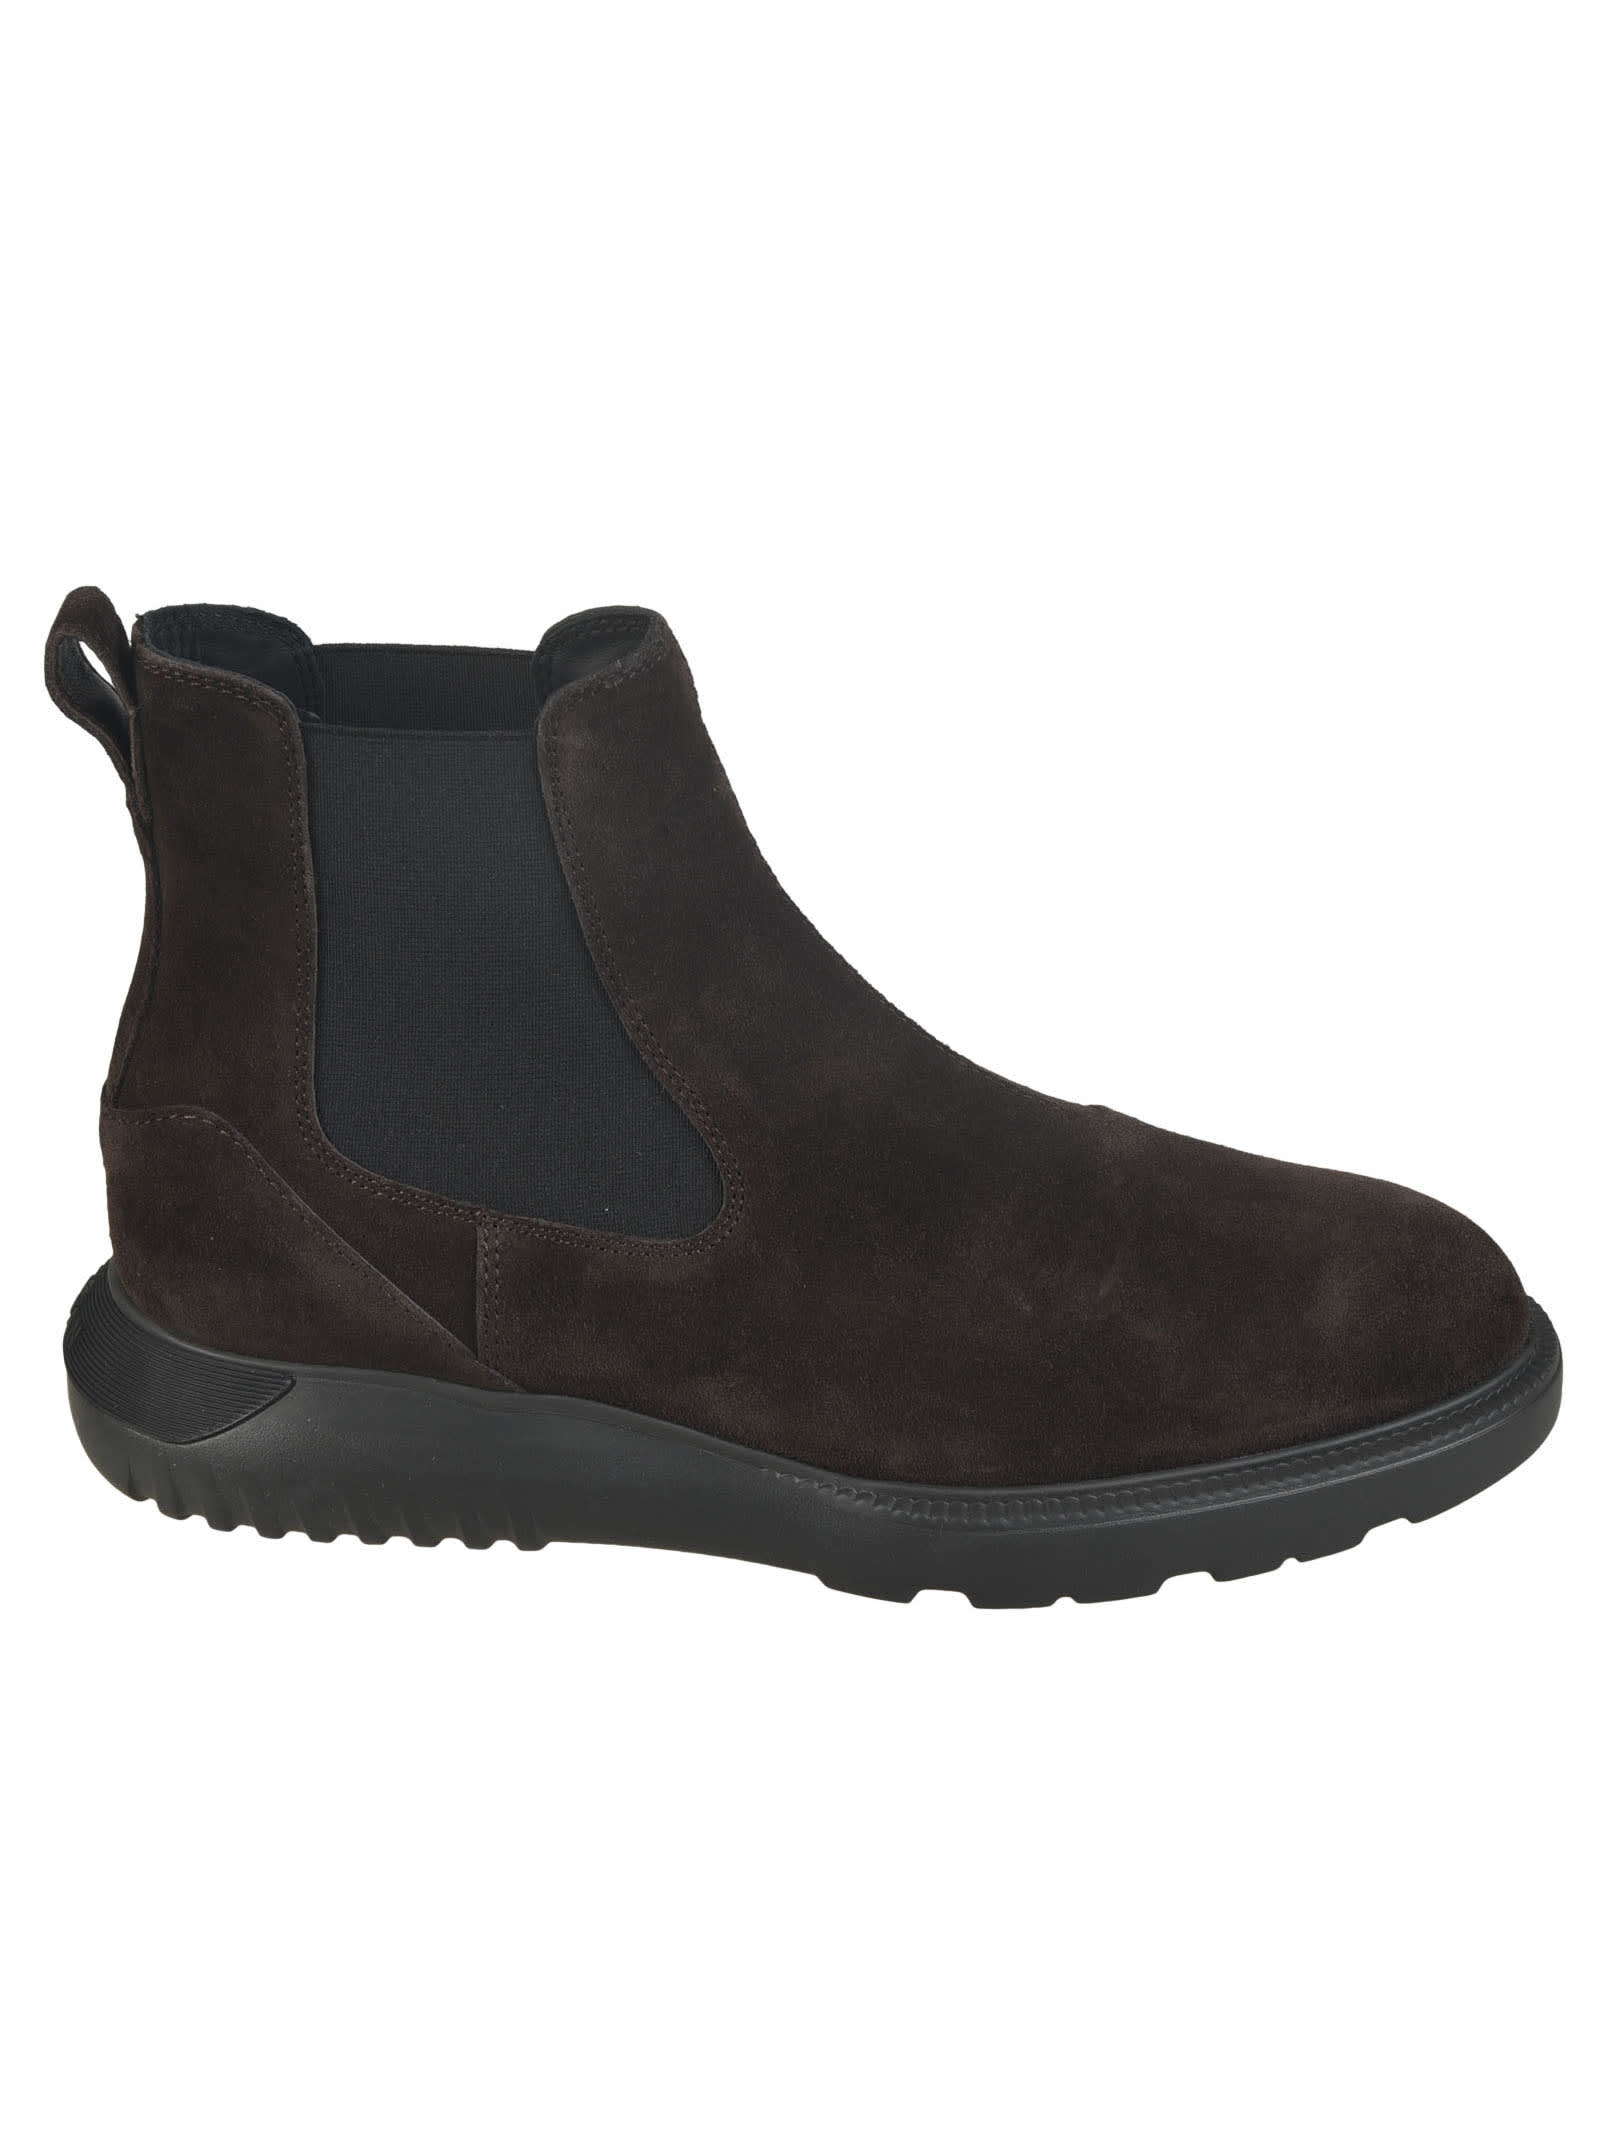 Hogan Round Toe Ankle Boots In S807